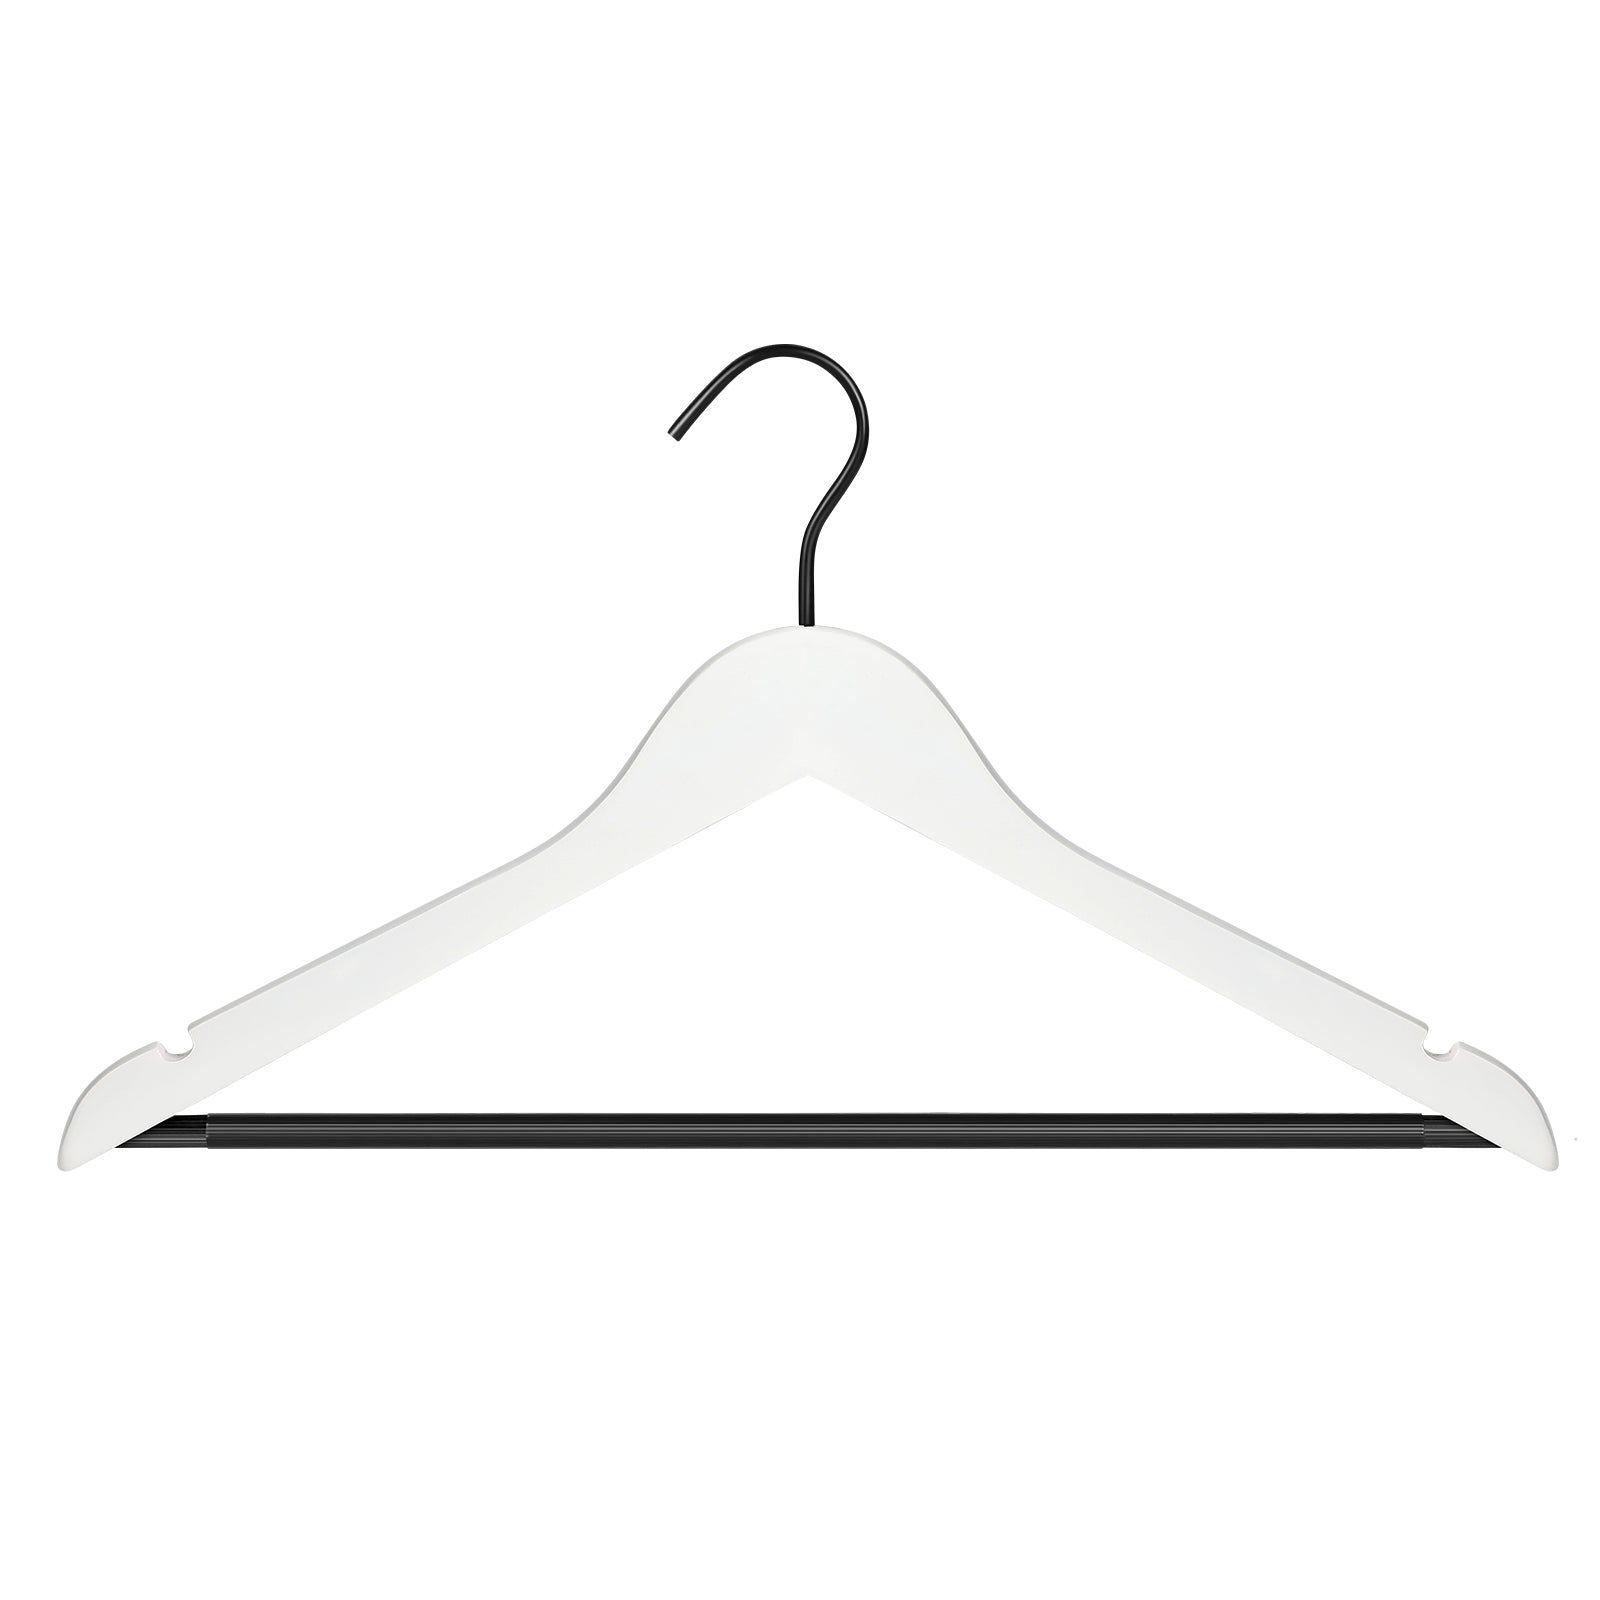 Perfecasa Premium Wooden Clothes Hangers 20 Pack, Wood Hangers with Noise  Canceling Hook, Heavy Duty Hangers, Coat Hangers, Shirt Hangers, with Non  Slip Pant Bar and Two Open Notches (Black Color)